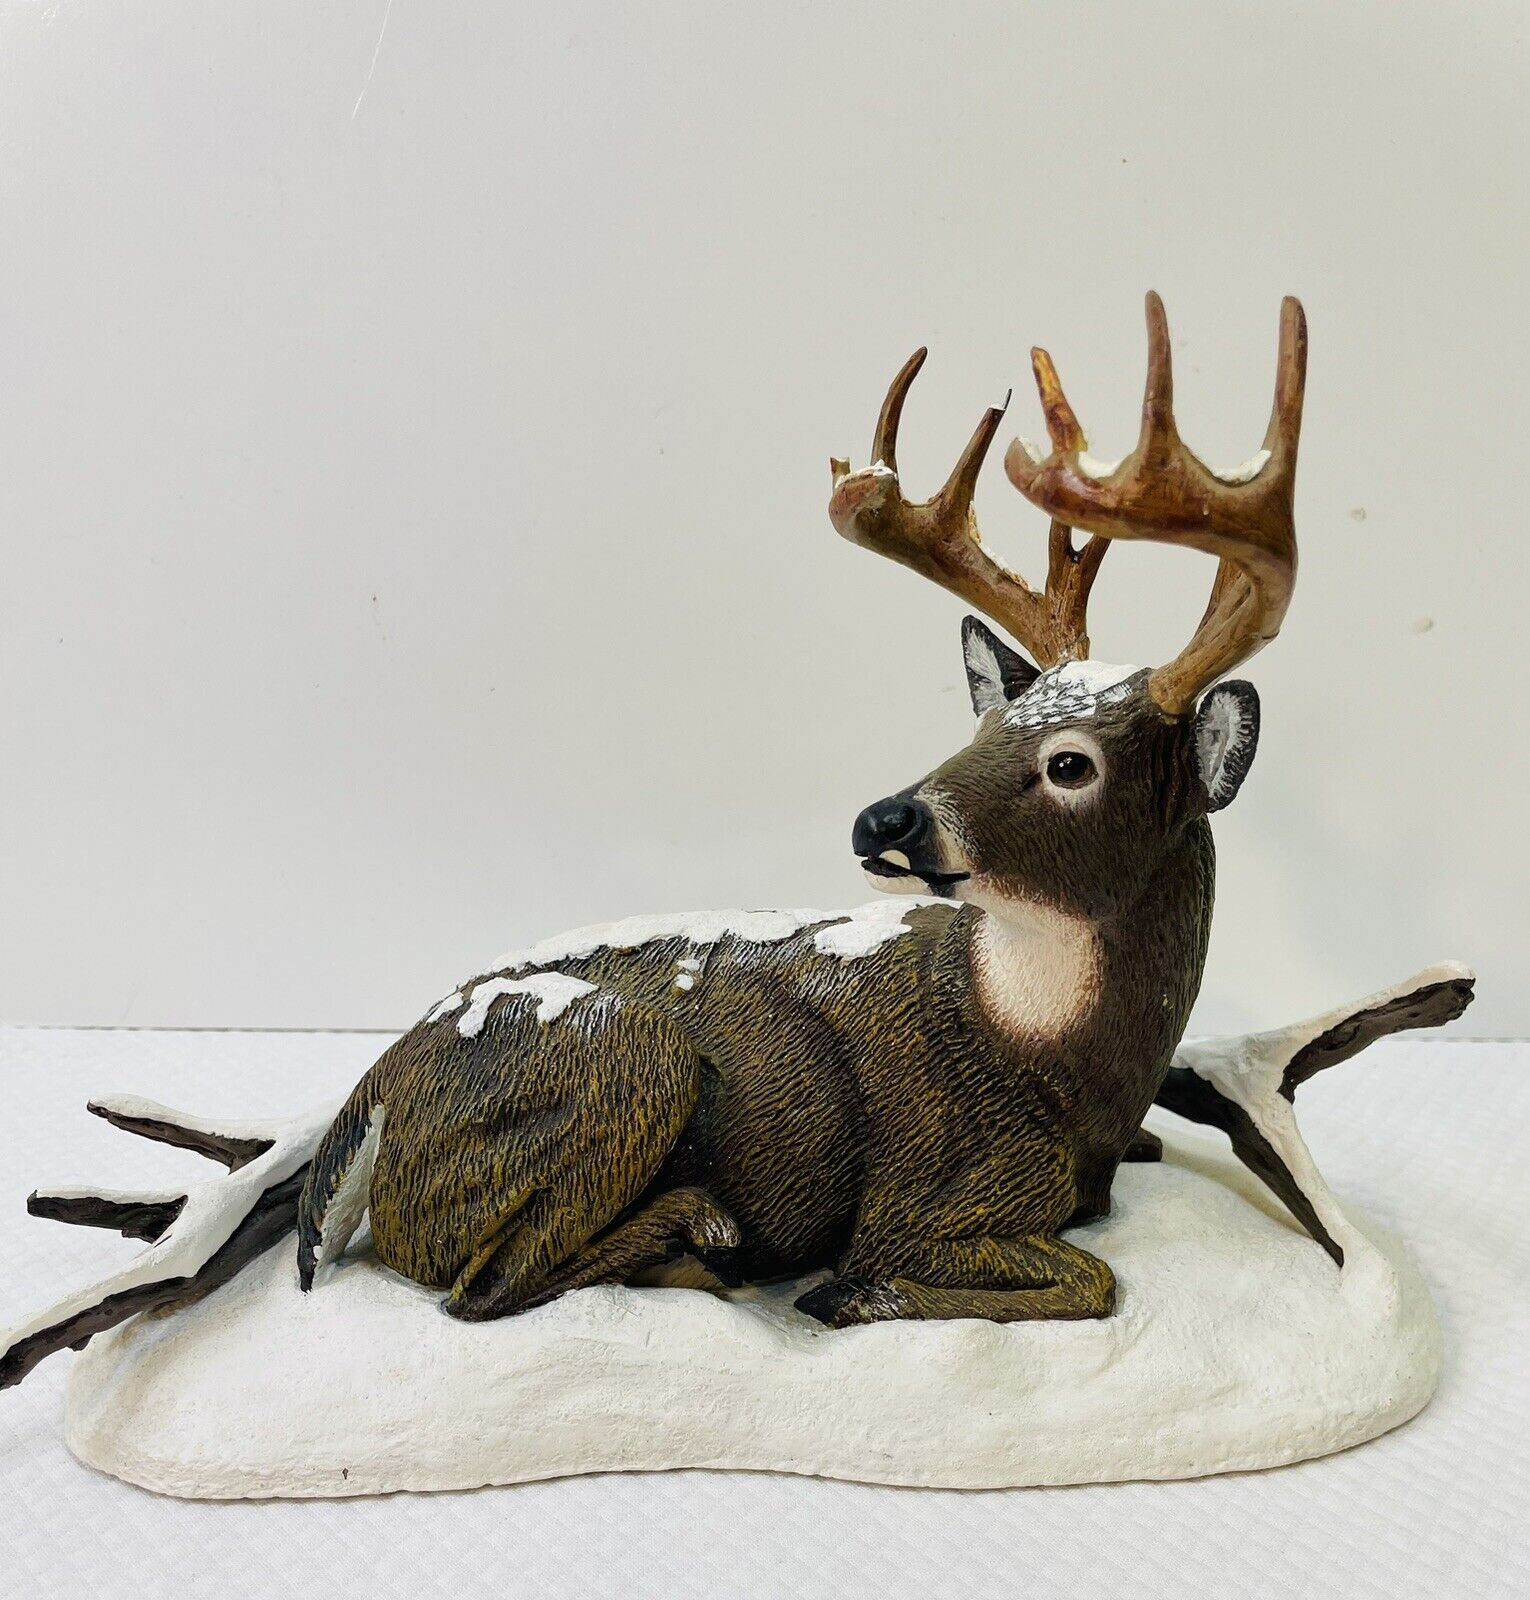 Danbury Mint Winter Stag White-Tailed Deer Sculpture Collection Bob Travers